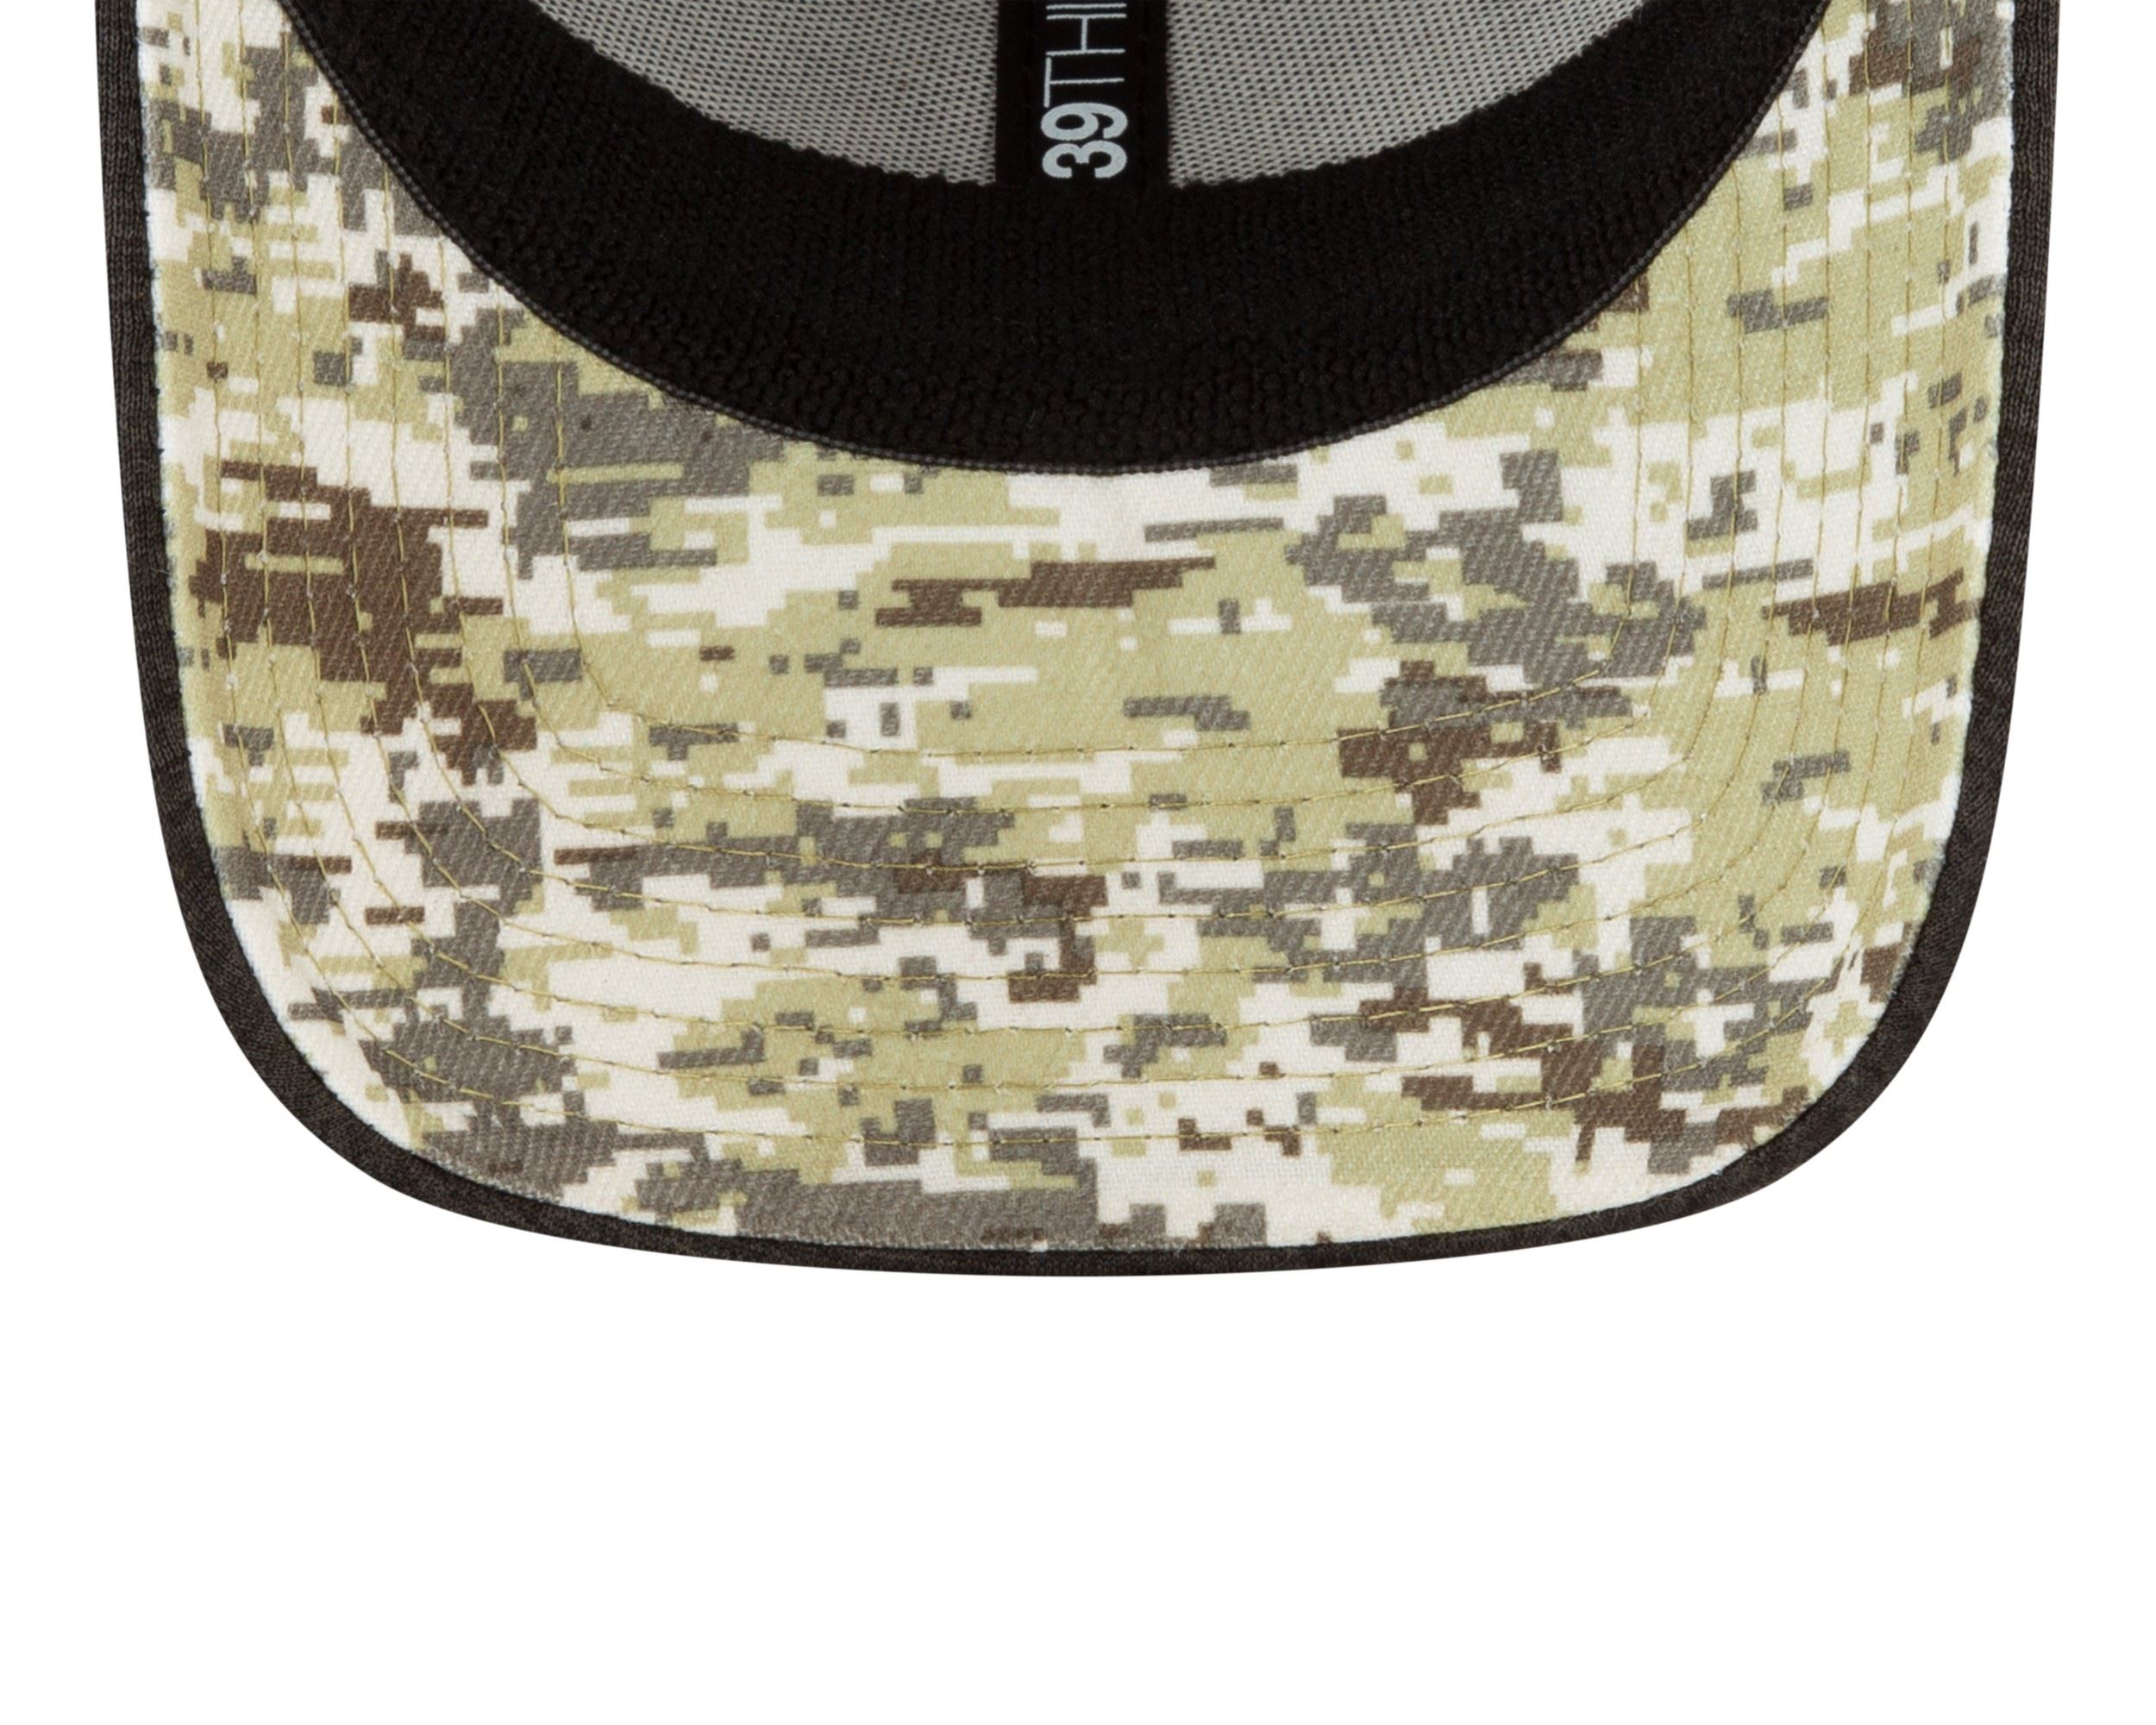 Green Bay Packers NFL On Field 2020 Salute to Service 39Thirty Stretch Cap New Era 